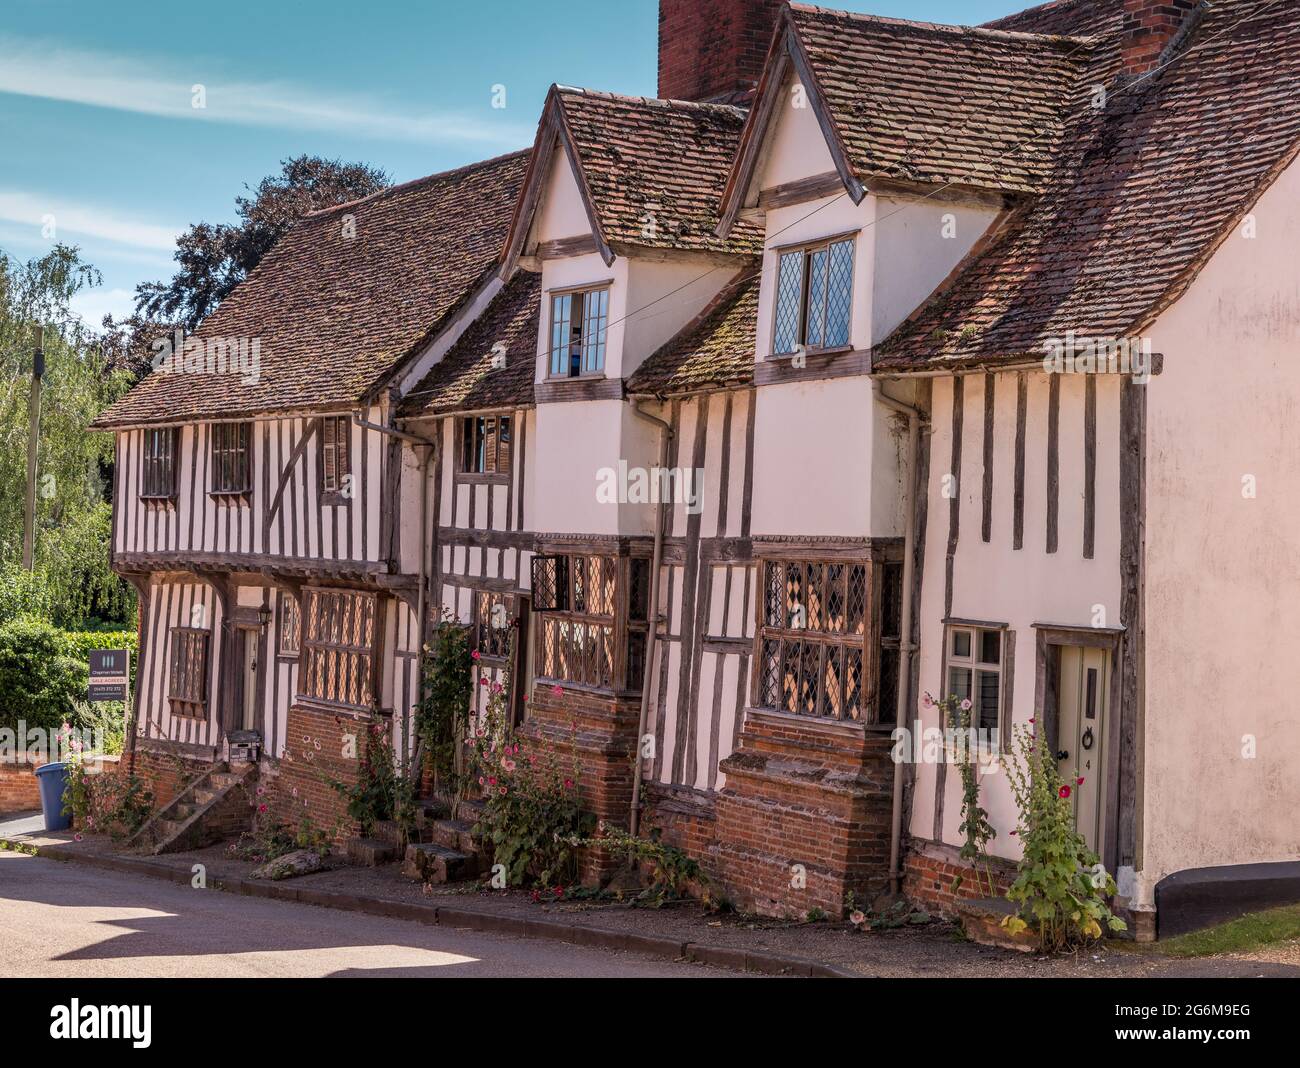 Row of timber framed houses at the Street Kersey in Suffolk, an quintessential picture-postcard English village Stock Photo